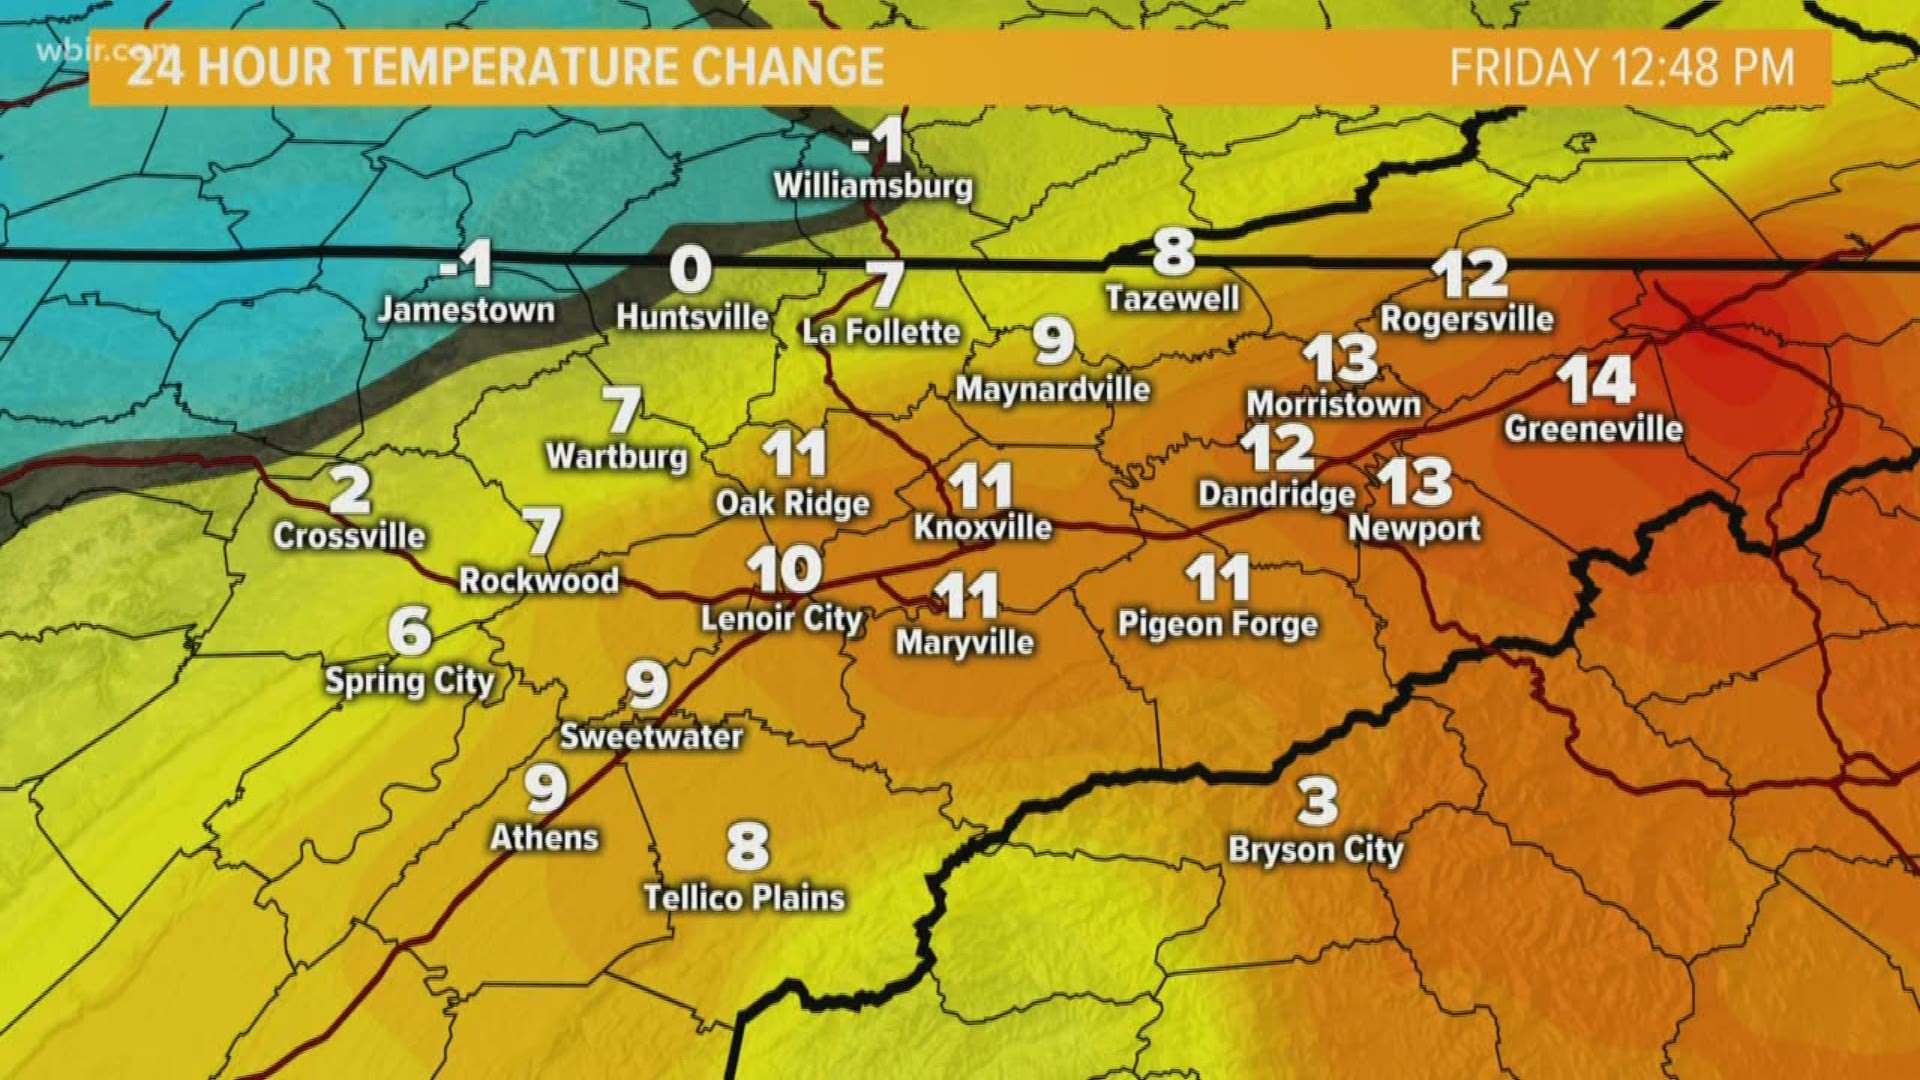 Temperatures are warming up after a cold week.